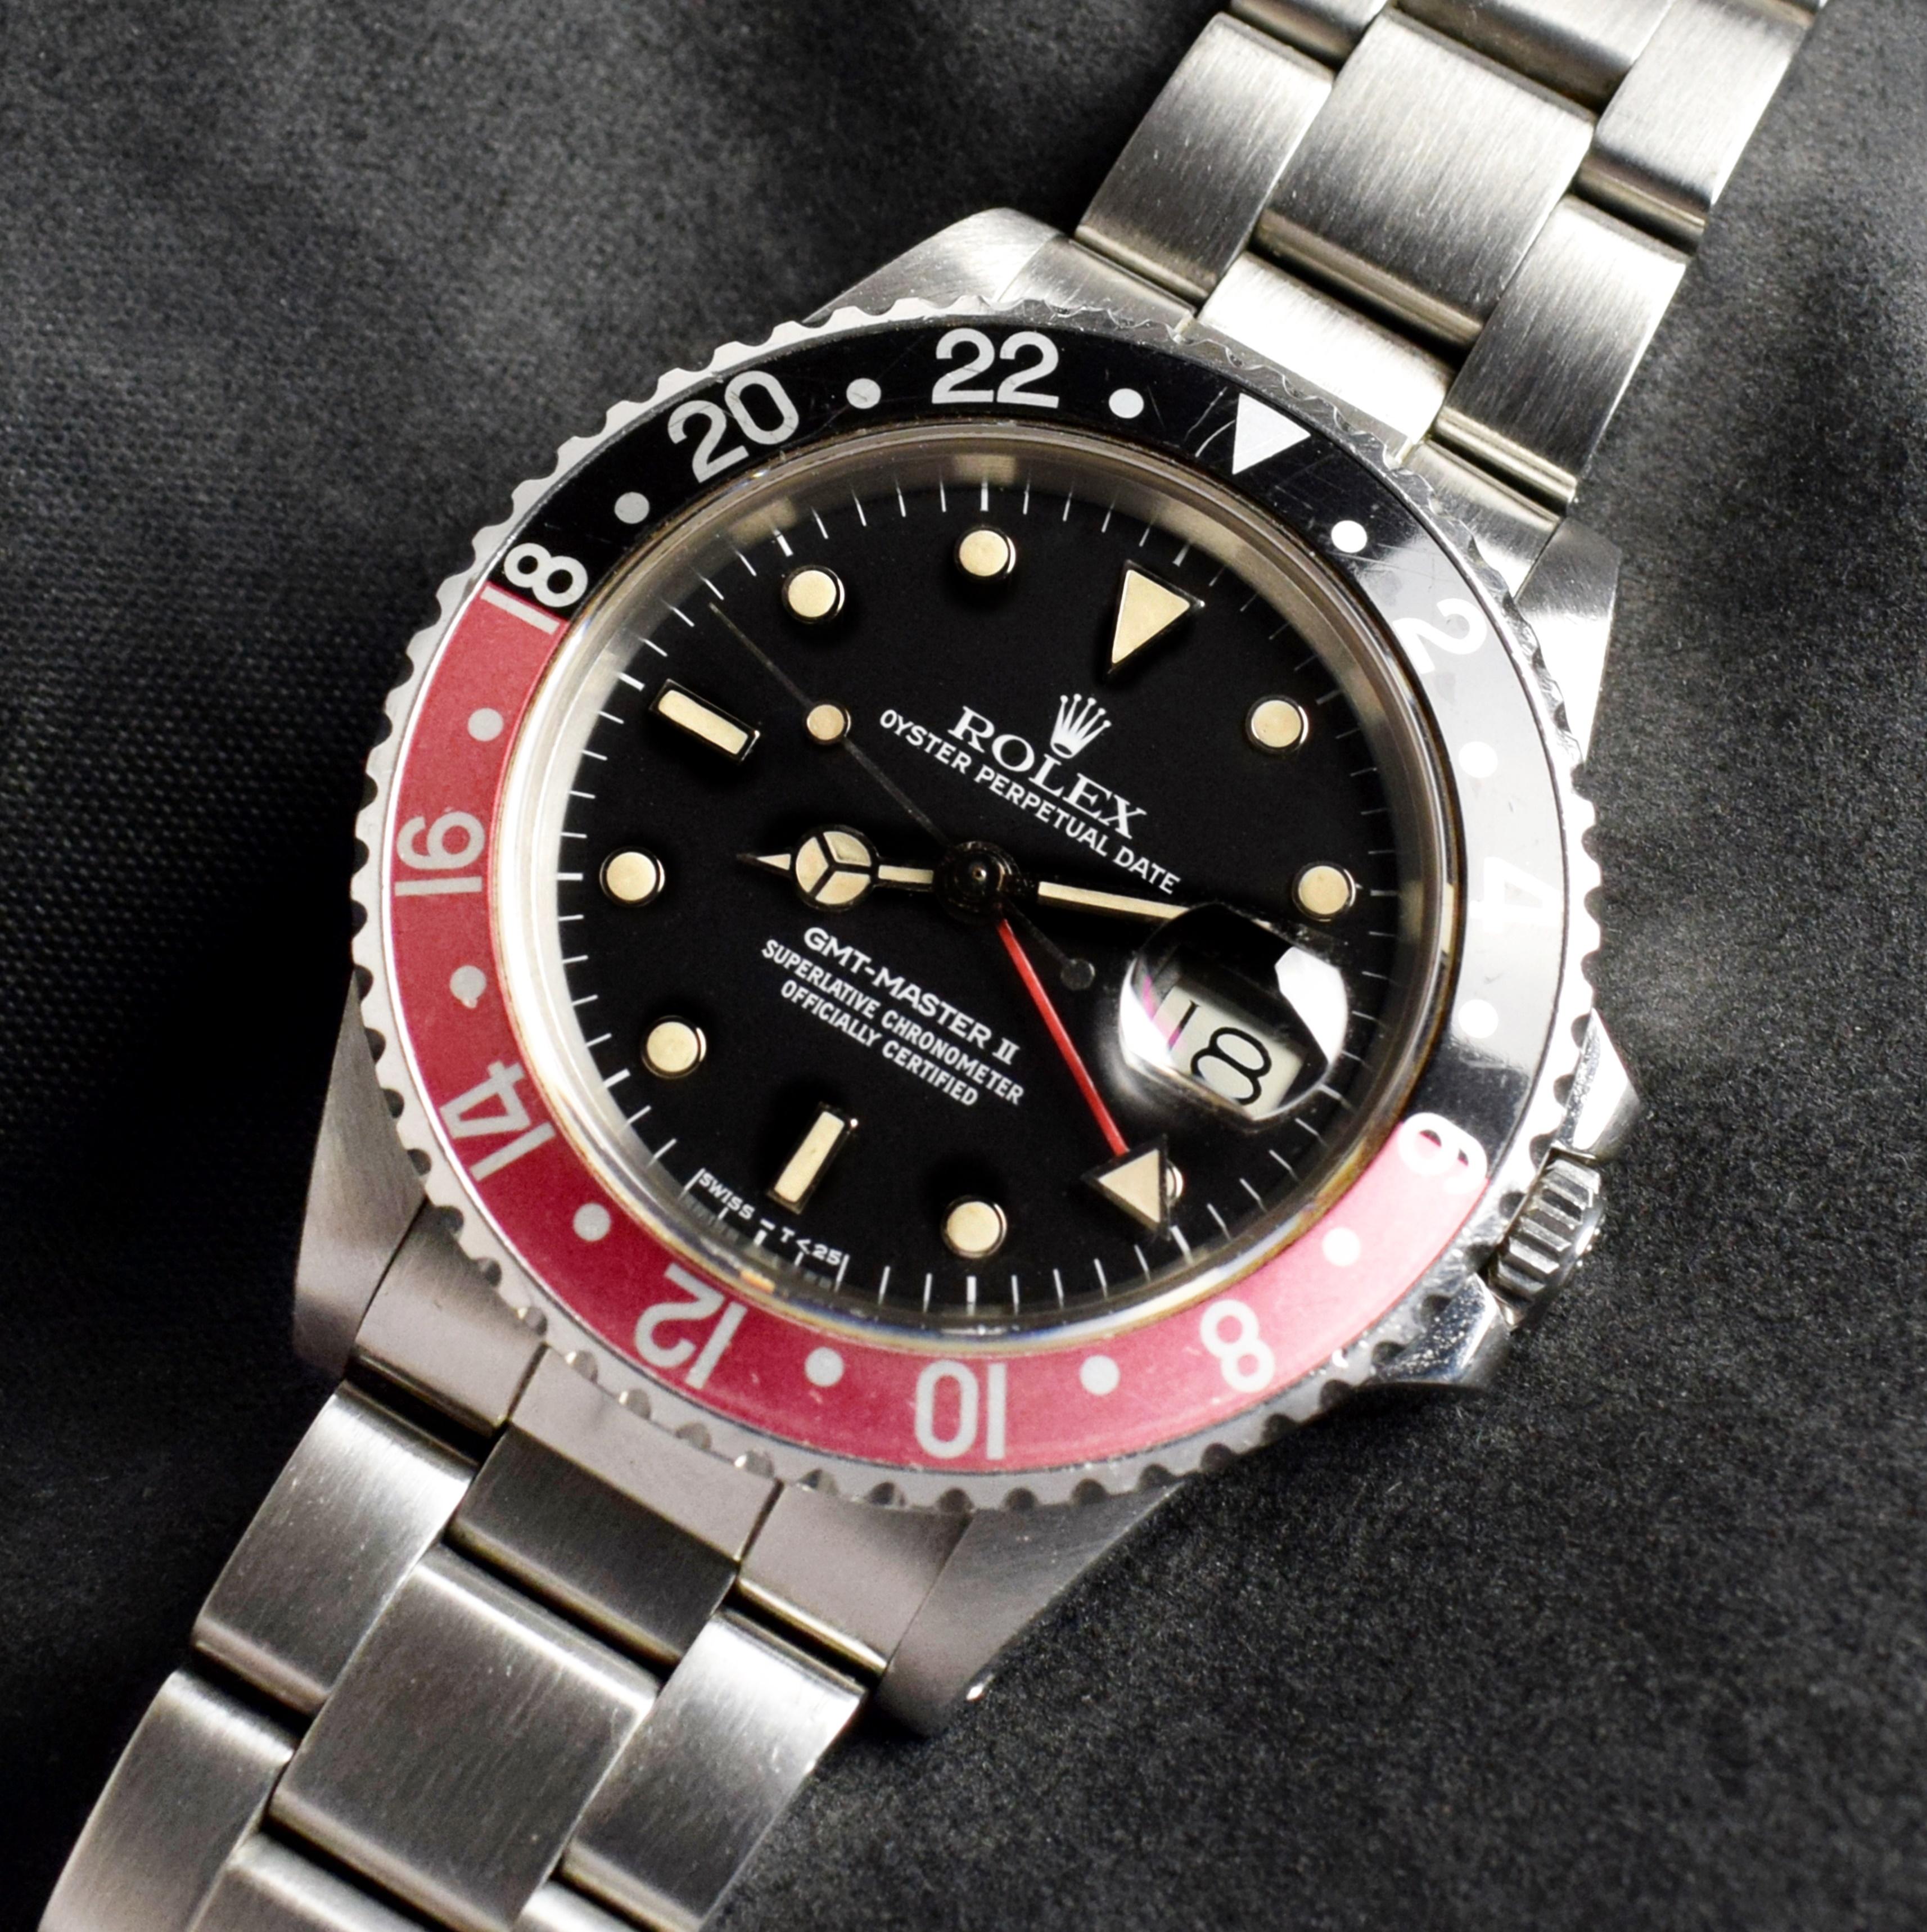 Brand: Rolex
Model: 16760
Year: 1986
Serial number: 94xxxxx
Reference: C03506; C03218
Case: Show sign of wear w/ slight polishing from previous; inner case back stamped 16760
Dial: Excellent Condition Black Tritium Dial where it has aged with a more